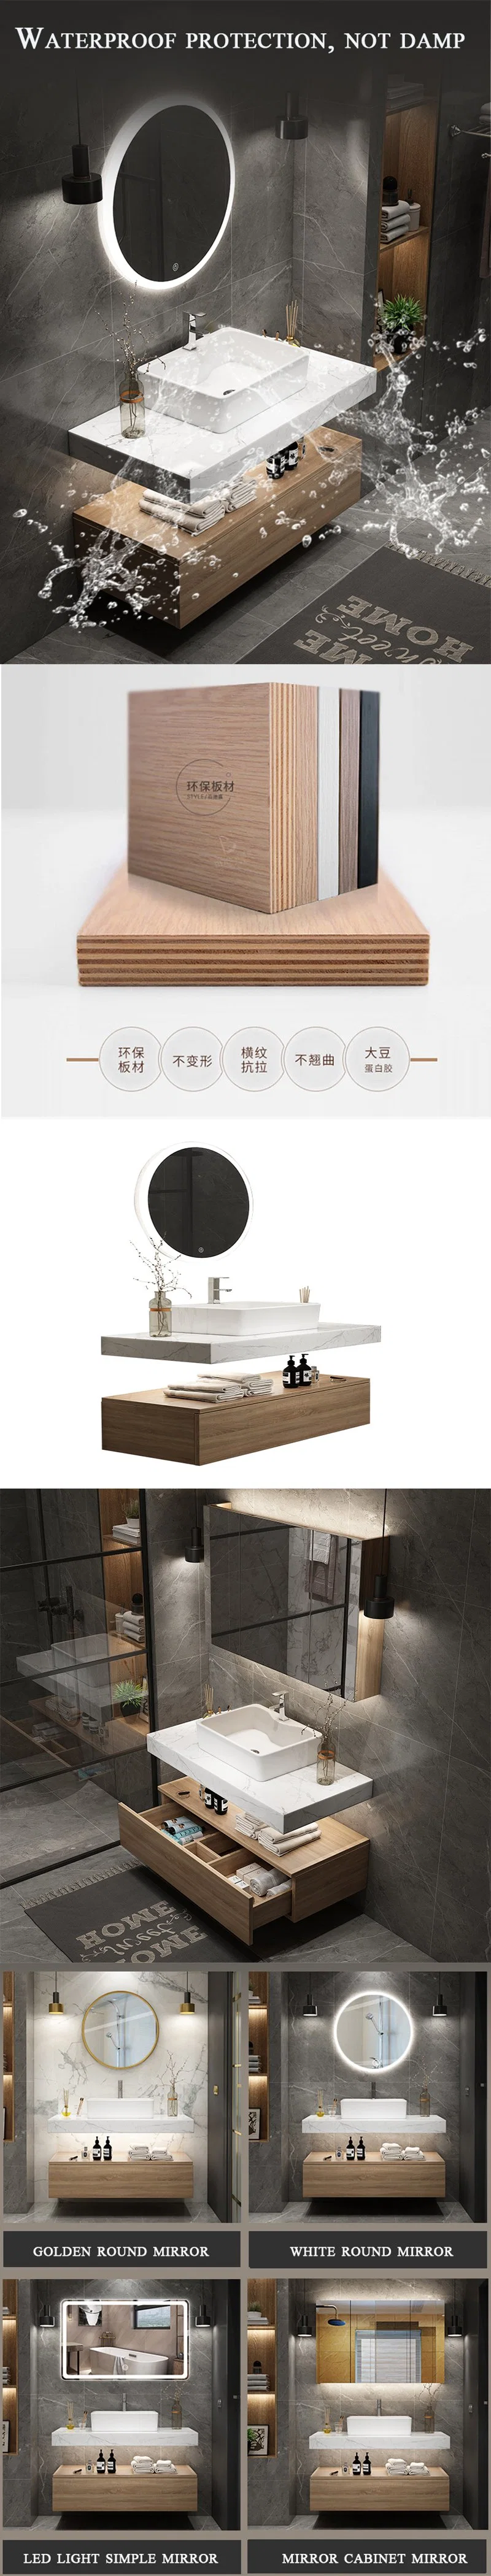 Guangdong Fatctoy ODM LED Smart Mirror Customized Size Color Basin Bathroom Vanity Cabinet (BY-X8005)